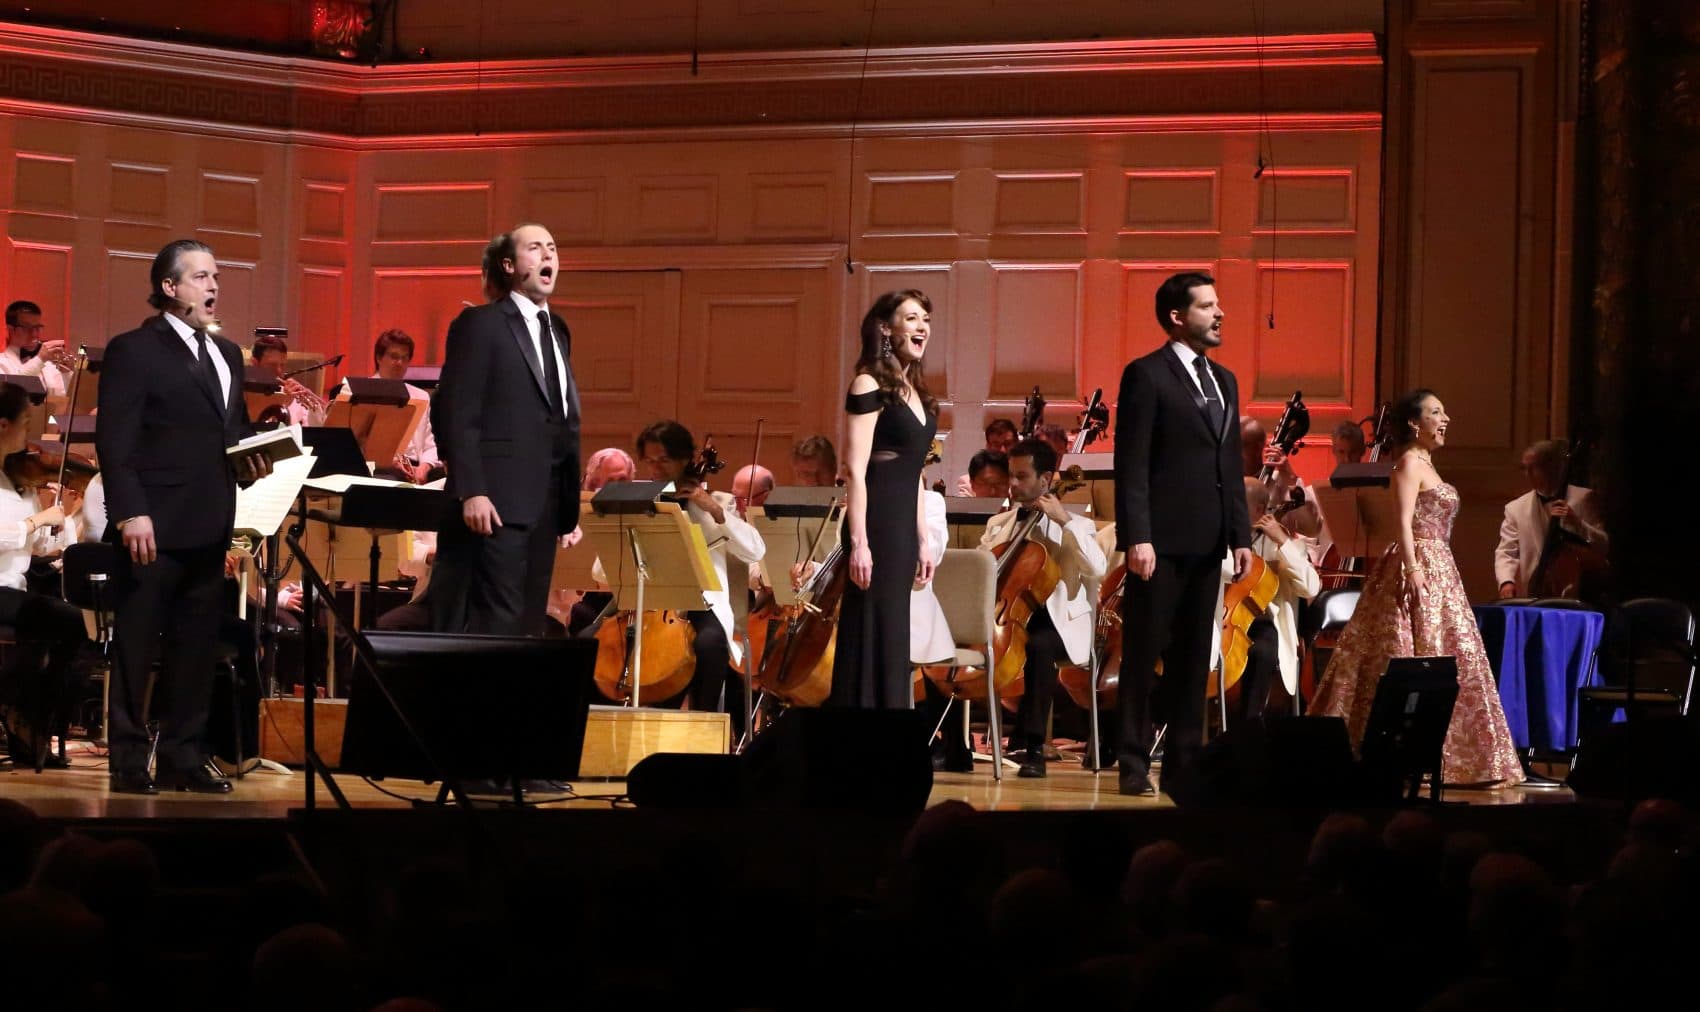 Matthew DiBattista, Andrew Tighe, Aimee Doherty and David McFerrin perform music from Leonard Bernstine's &quot;Candide&quot; with the Boston Pops on May 5, 2018. (Courtesy Hilary Scott)